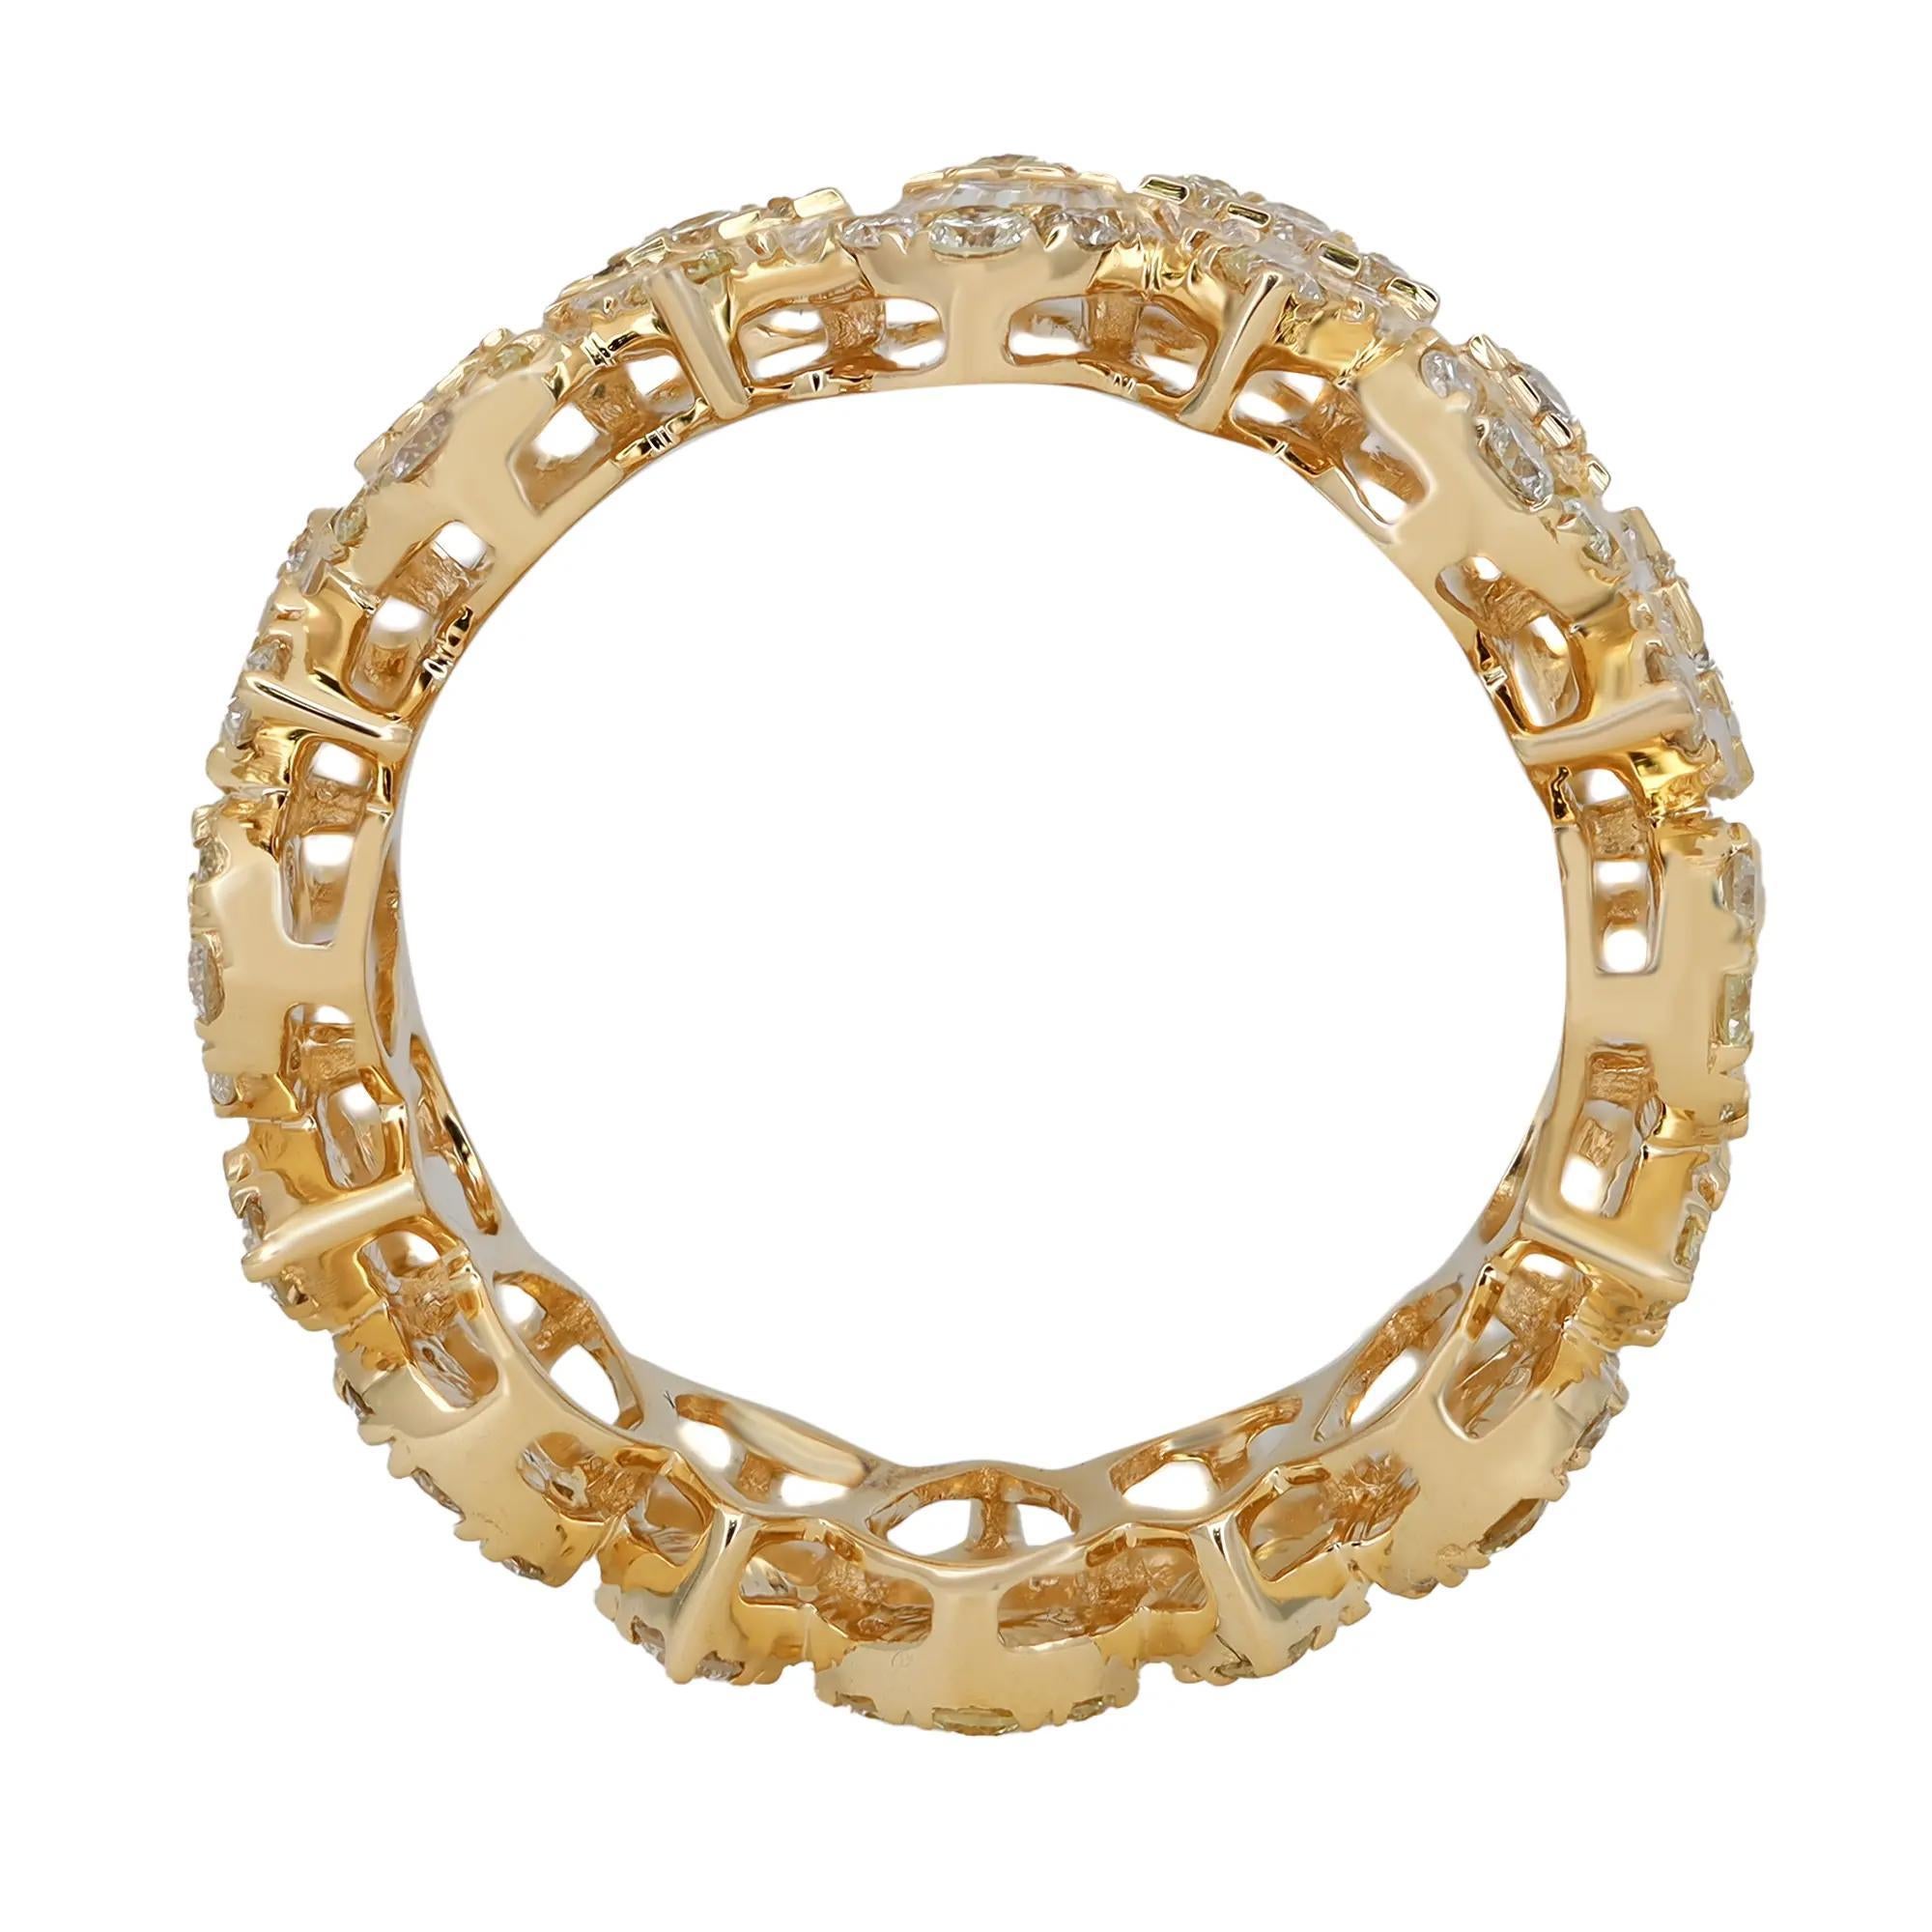 Modern Baguette And Round Cut Diamond Eternity Band Ring 14K Yellow Gold 2.12Ctw SZ 7.5 For Sale